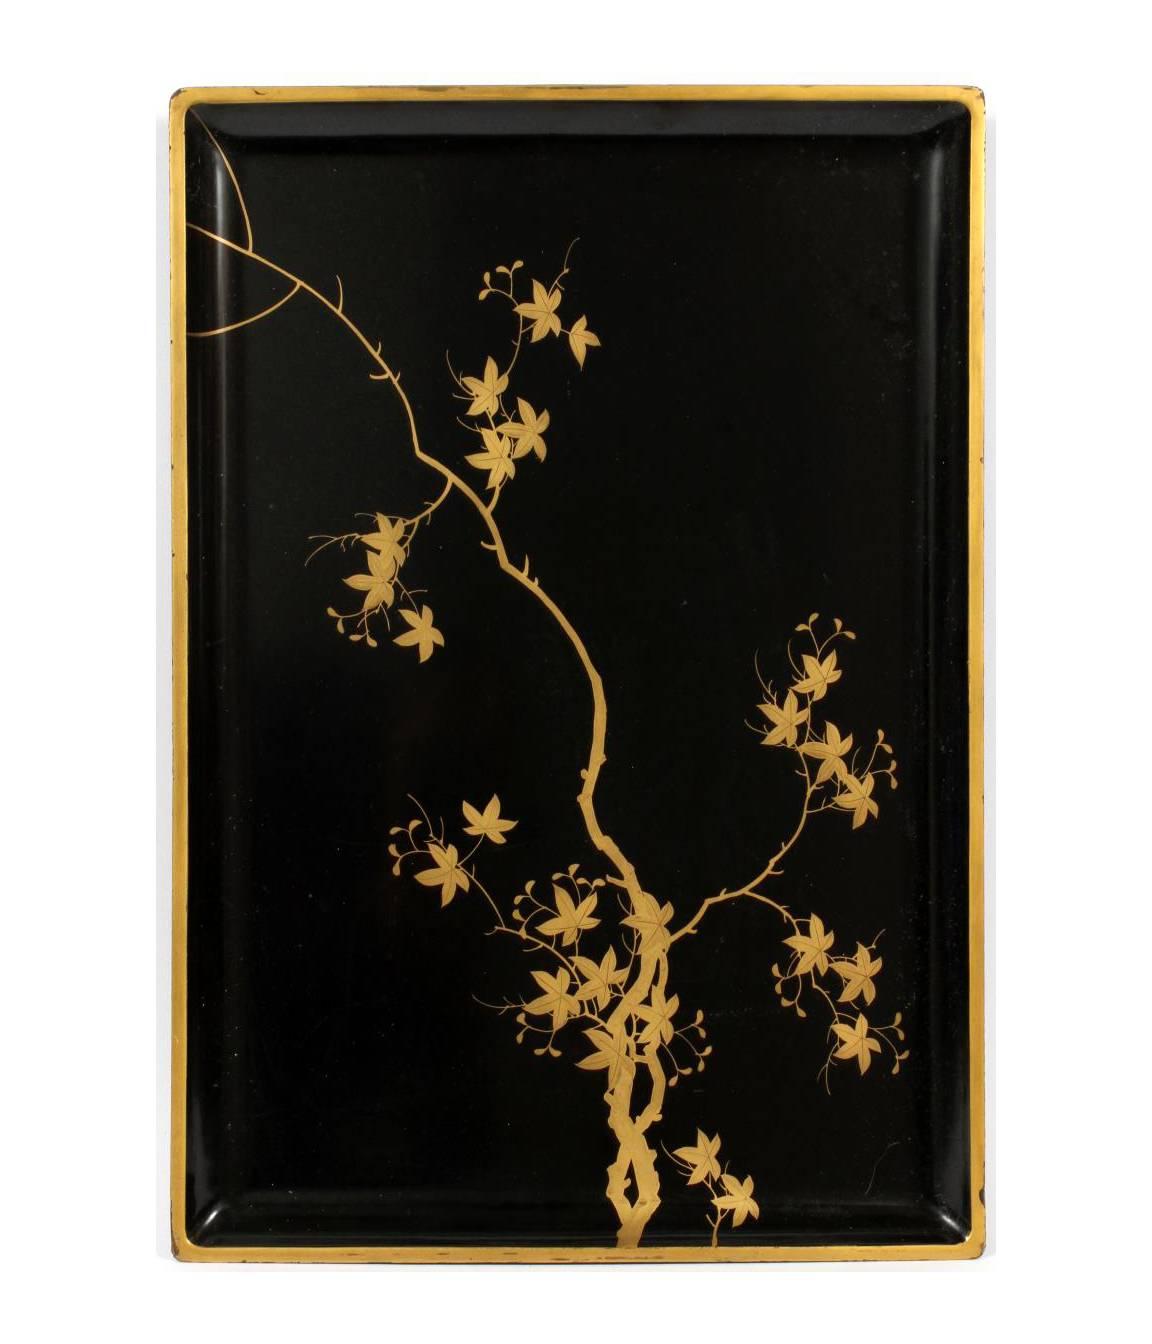 A black lacquered tray, decorated with a gilt branch. Measures W.20 1/4" x 14".
W 10"-14": Includes one footed tray with a few blossoms, W 10 3/4" x 10 3/4"; one black lacquered tray with pine branches, W.14 3/4"